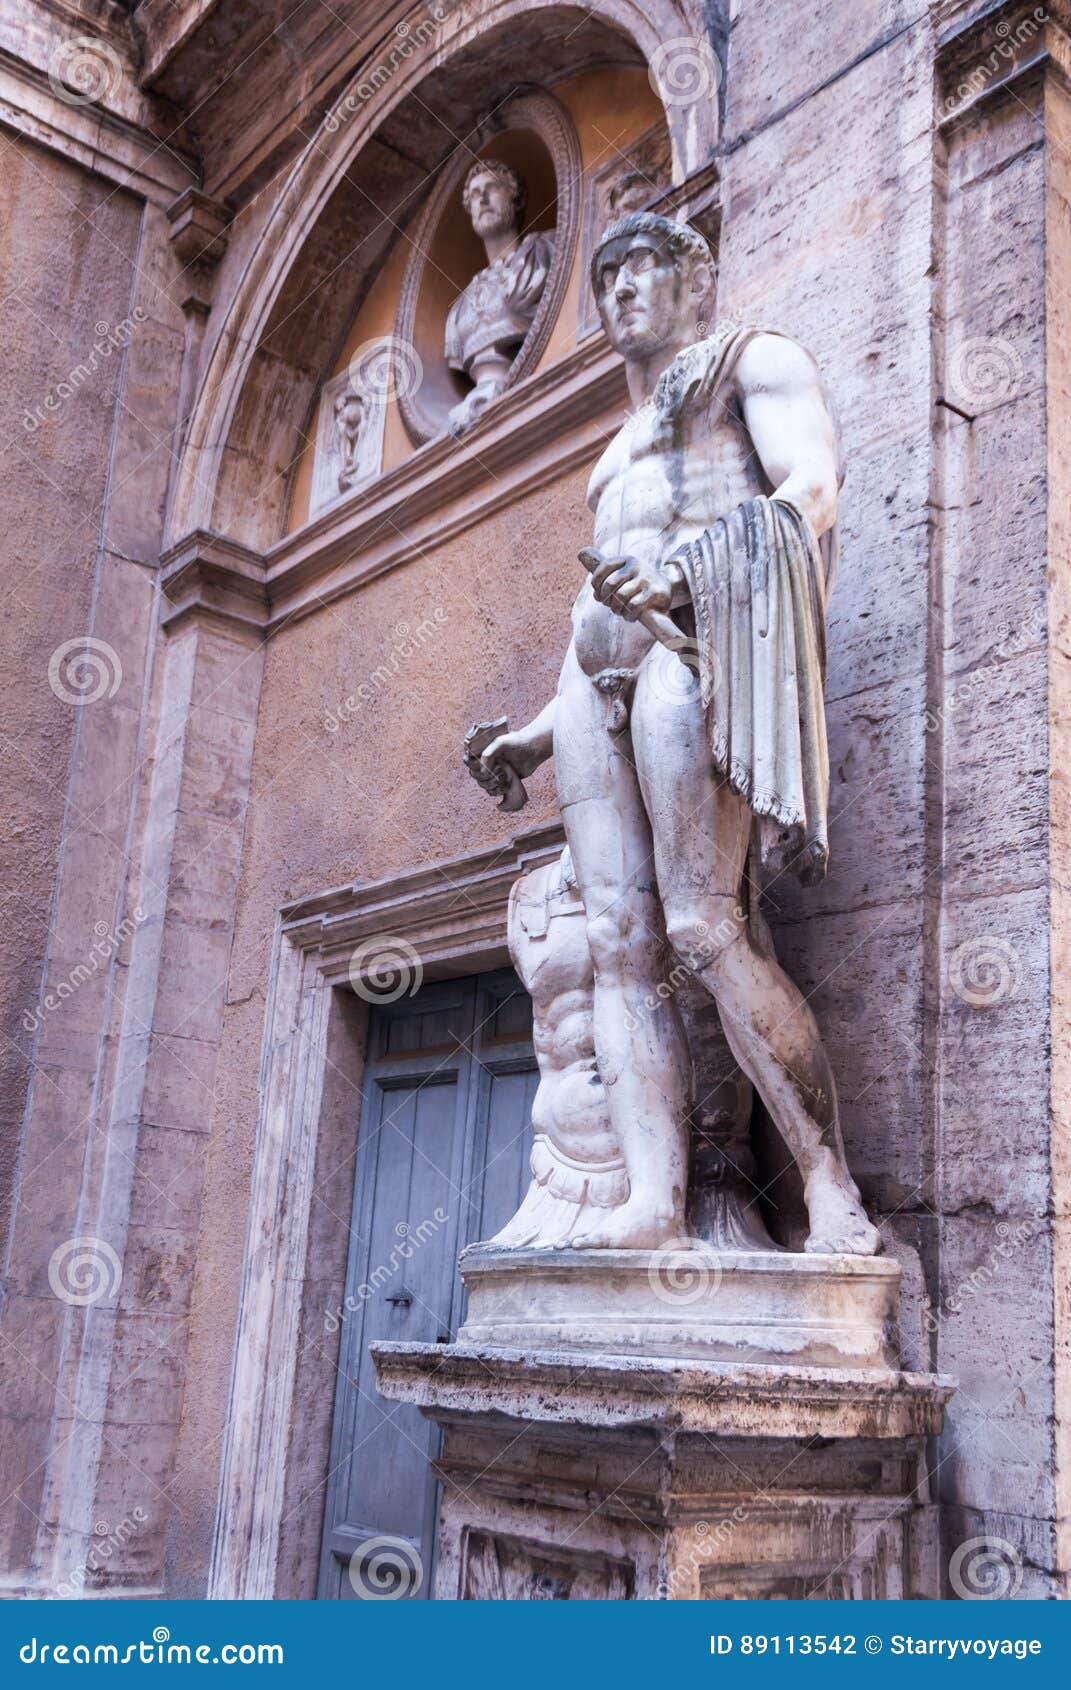 heroic romanesque statue in the ancient palazzo mattei di giove courtyar